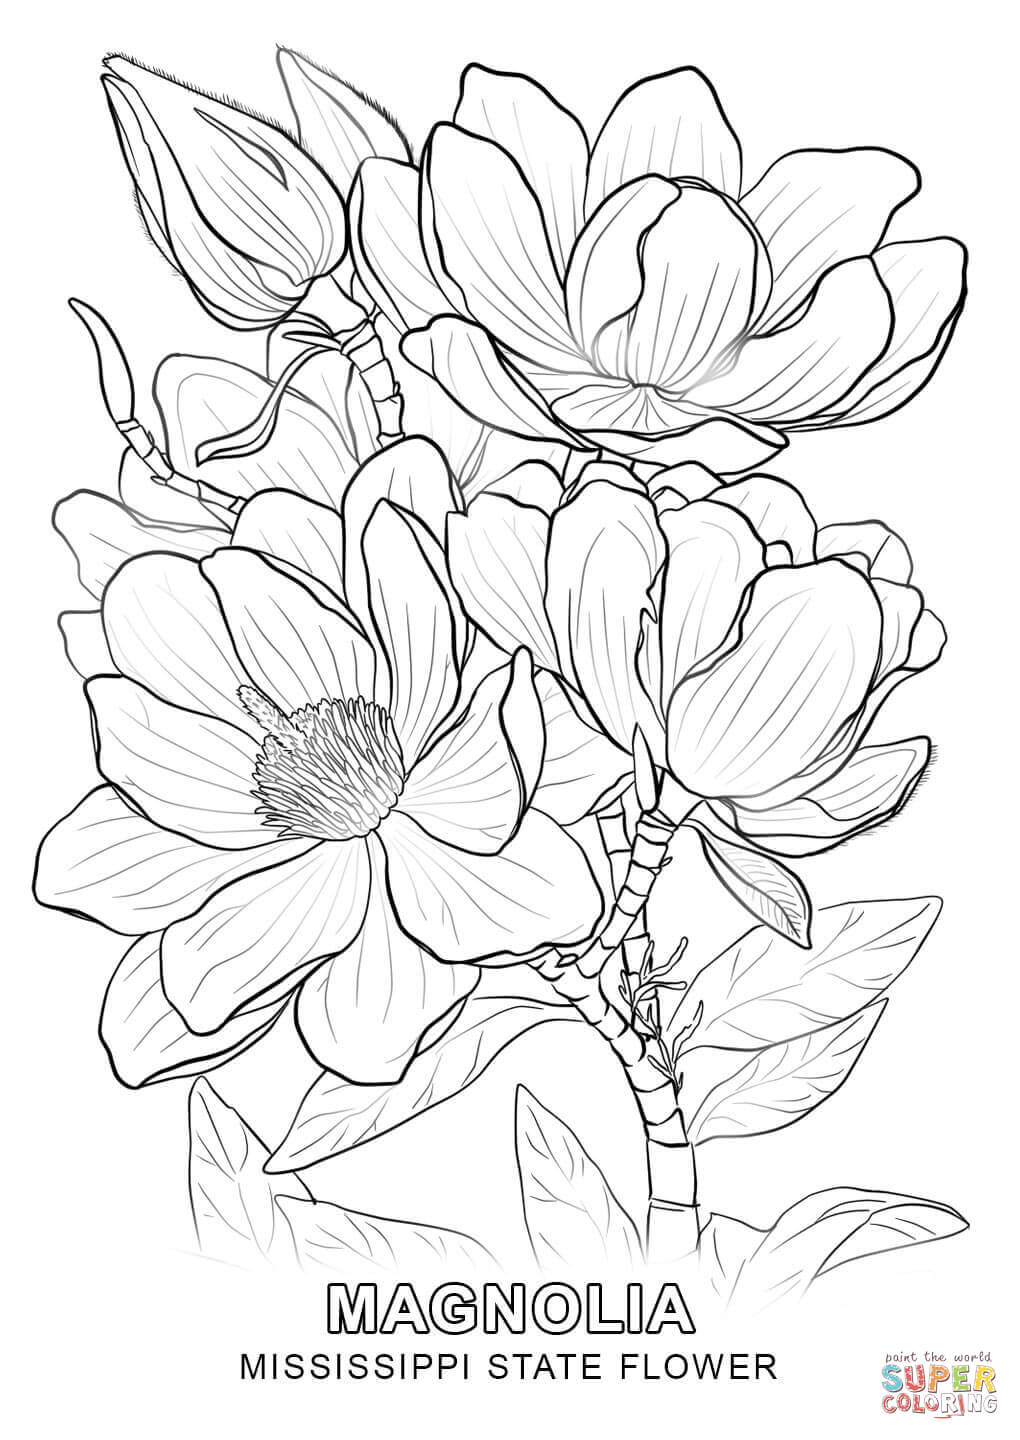 Mississippi State Flower coloring page | Free Printable Coloring Pages